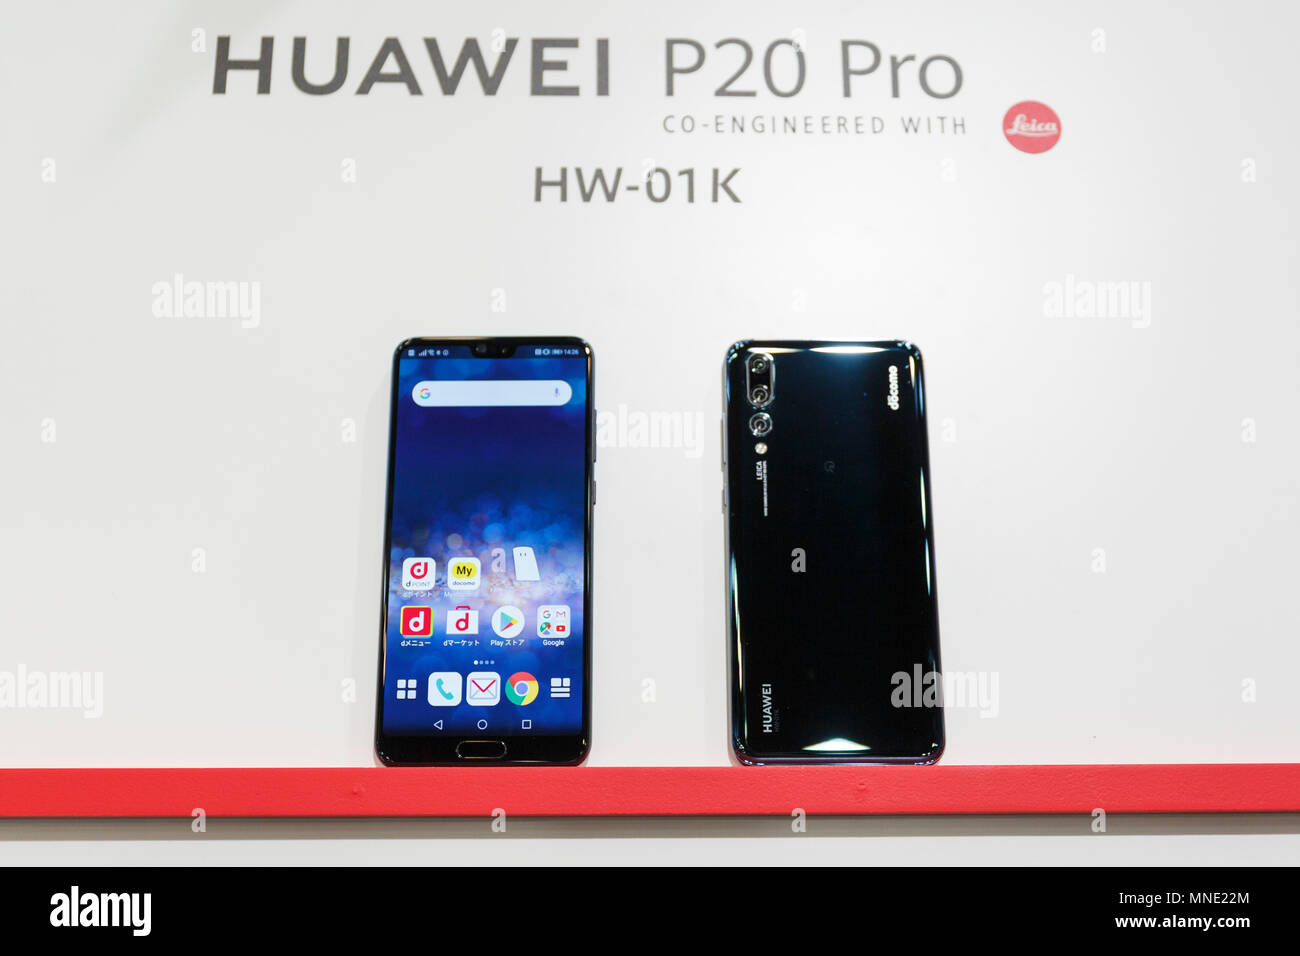 DOMOCO's new smartphone HUAWEI P20 Pro (HW-01K) on display during